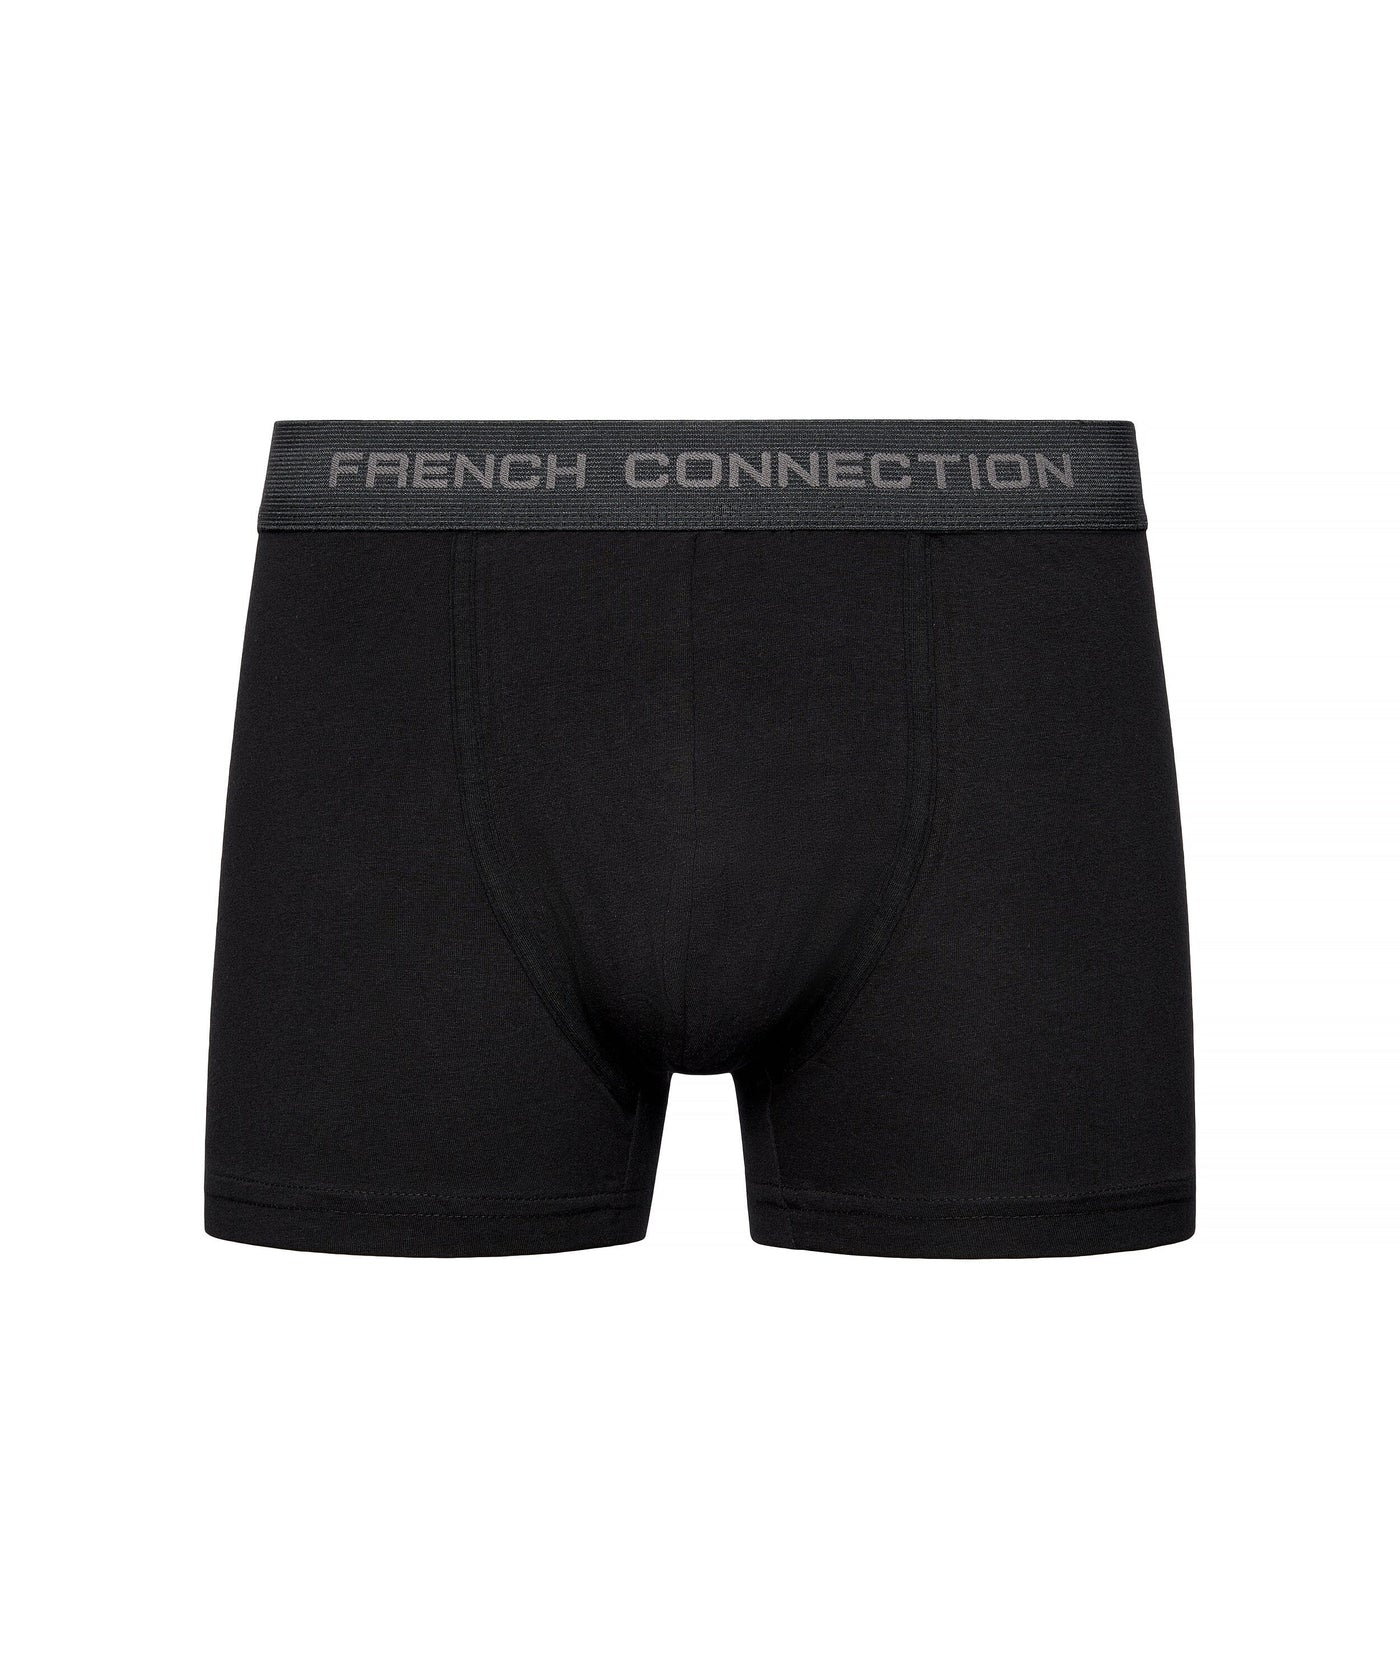 French Connection XL Boxers 5pk Black